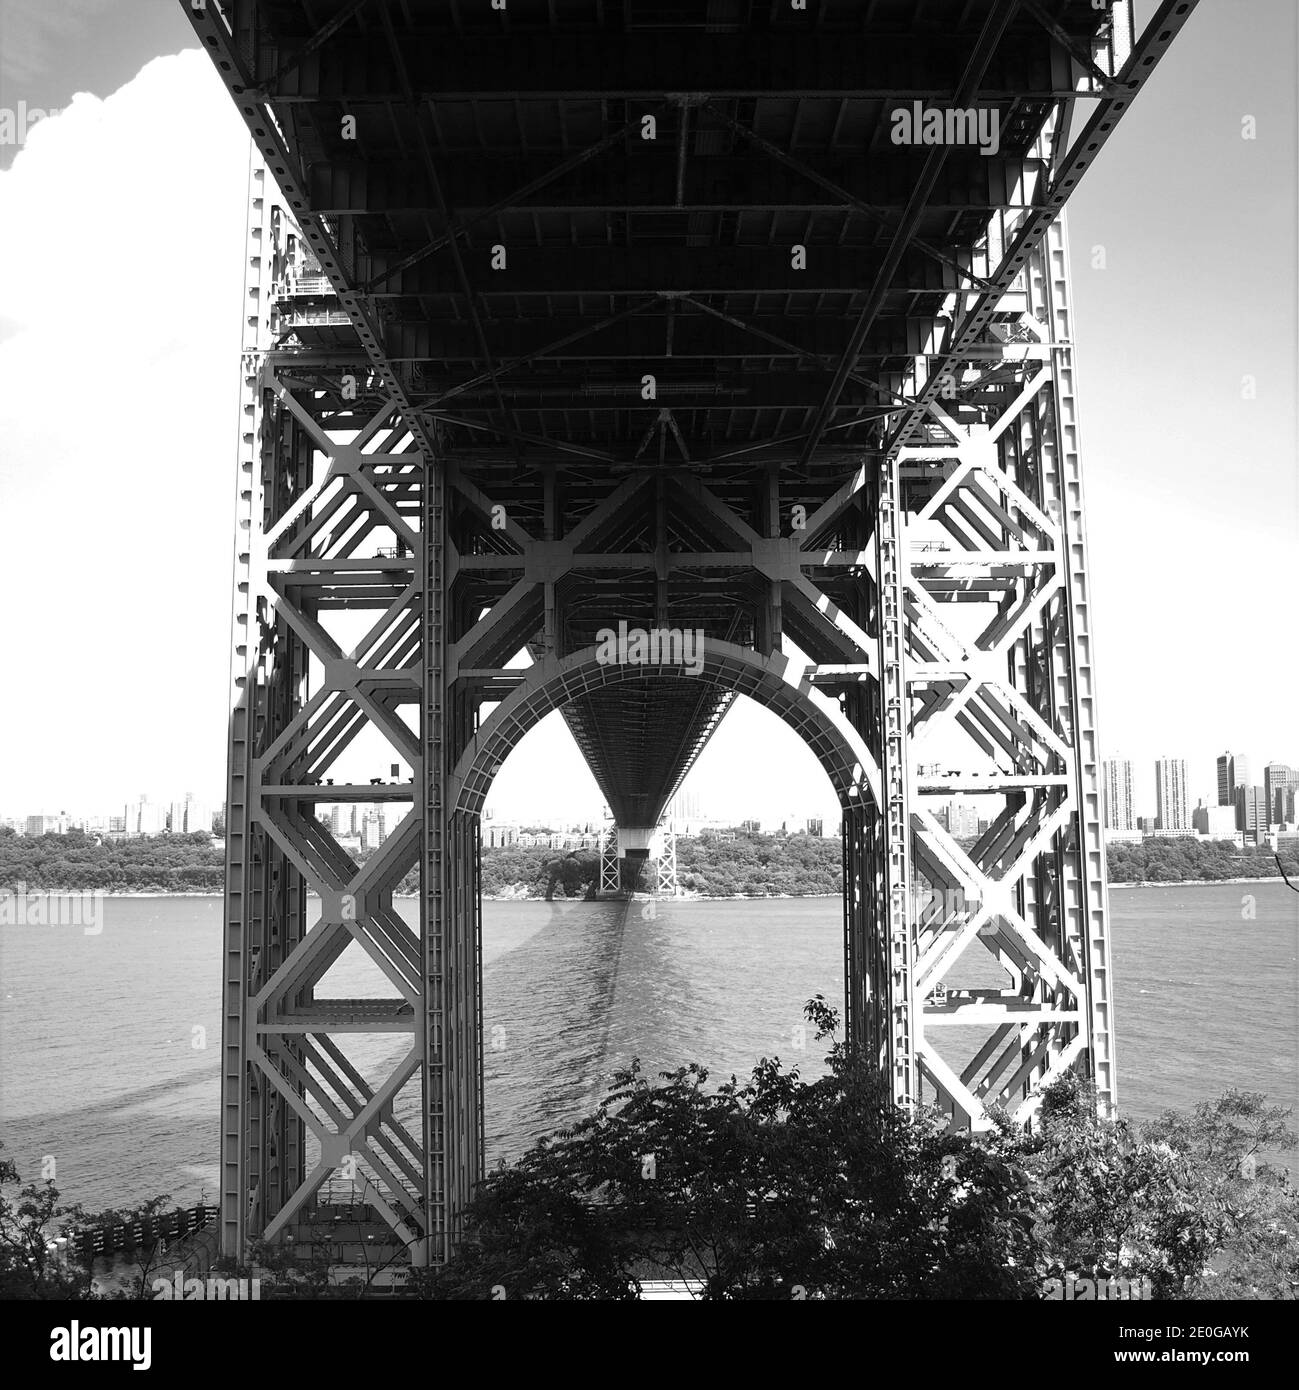 New York City's iconic George Washington Bridge over the Hudson River between Fort Lee, New Jersey and the Bronx in New York City. Opened in 1931. Stock Photo